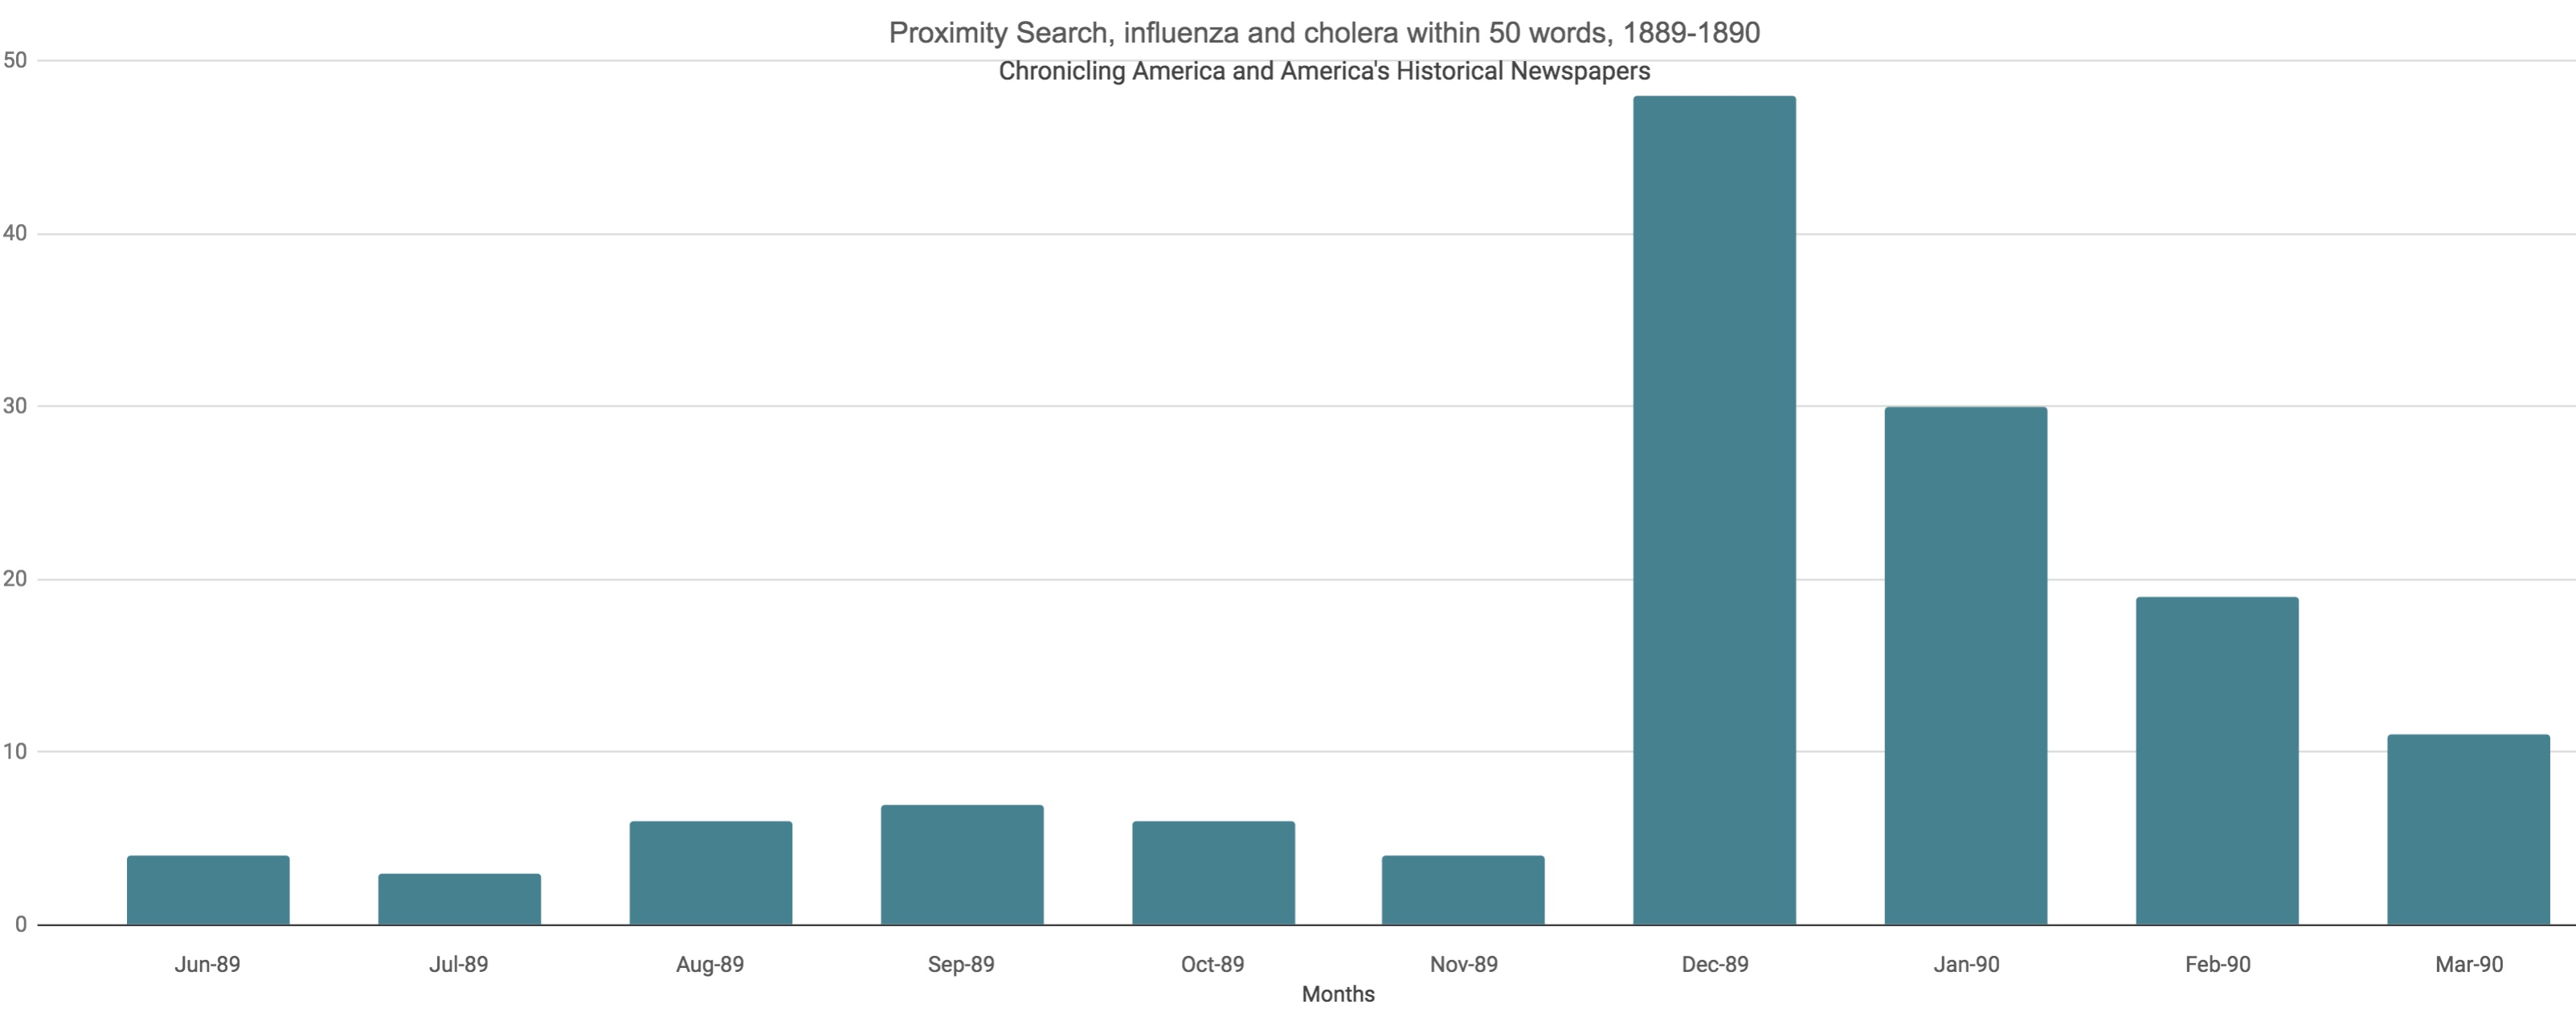 A bar chart showing the number of newspaper pages each where the terms "influenza" and  "cholera" appeared within 50 words of each other, divided by month from June eighteen hundred and eighty-nine to May nineteen hundred and ninety.